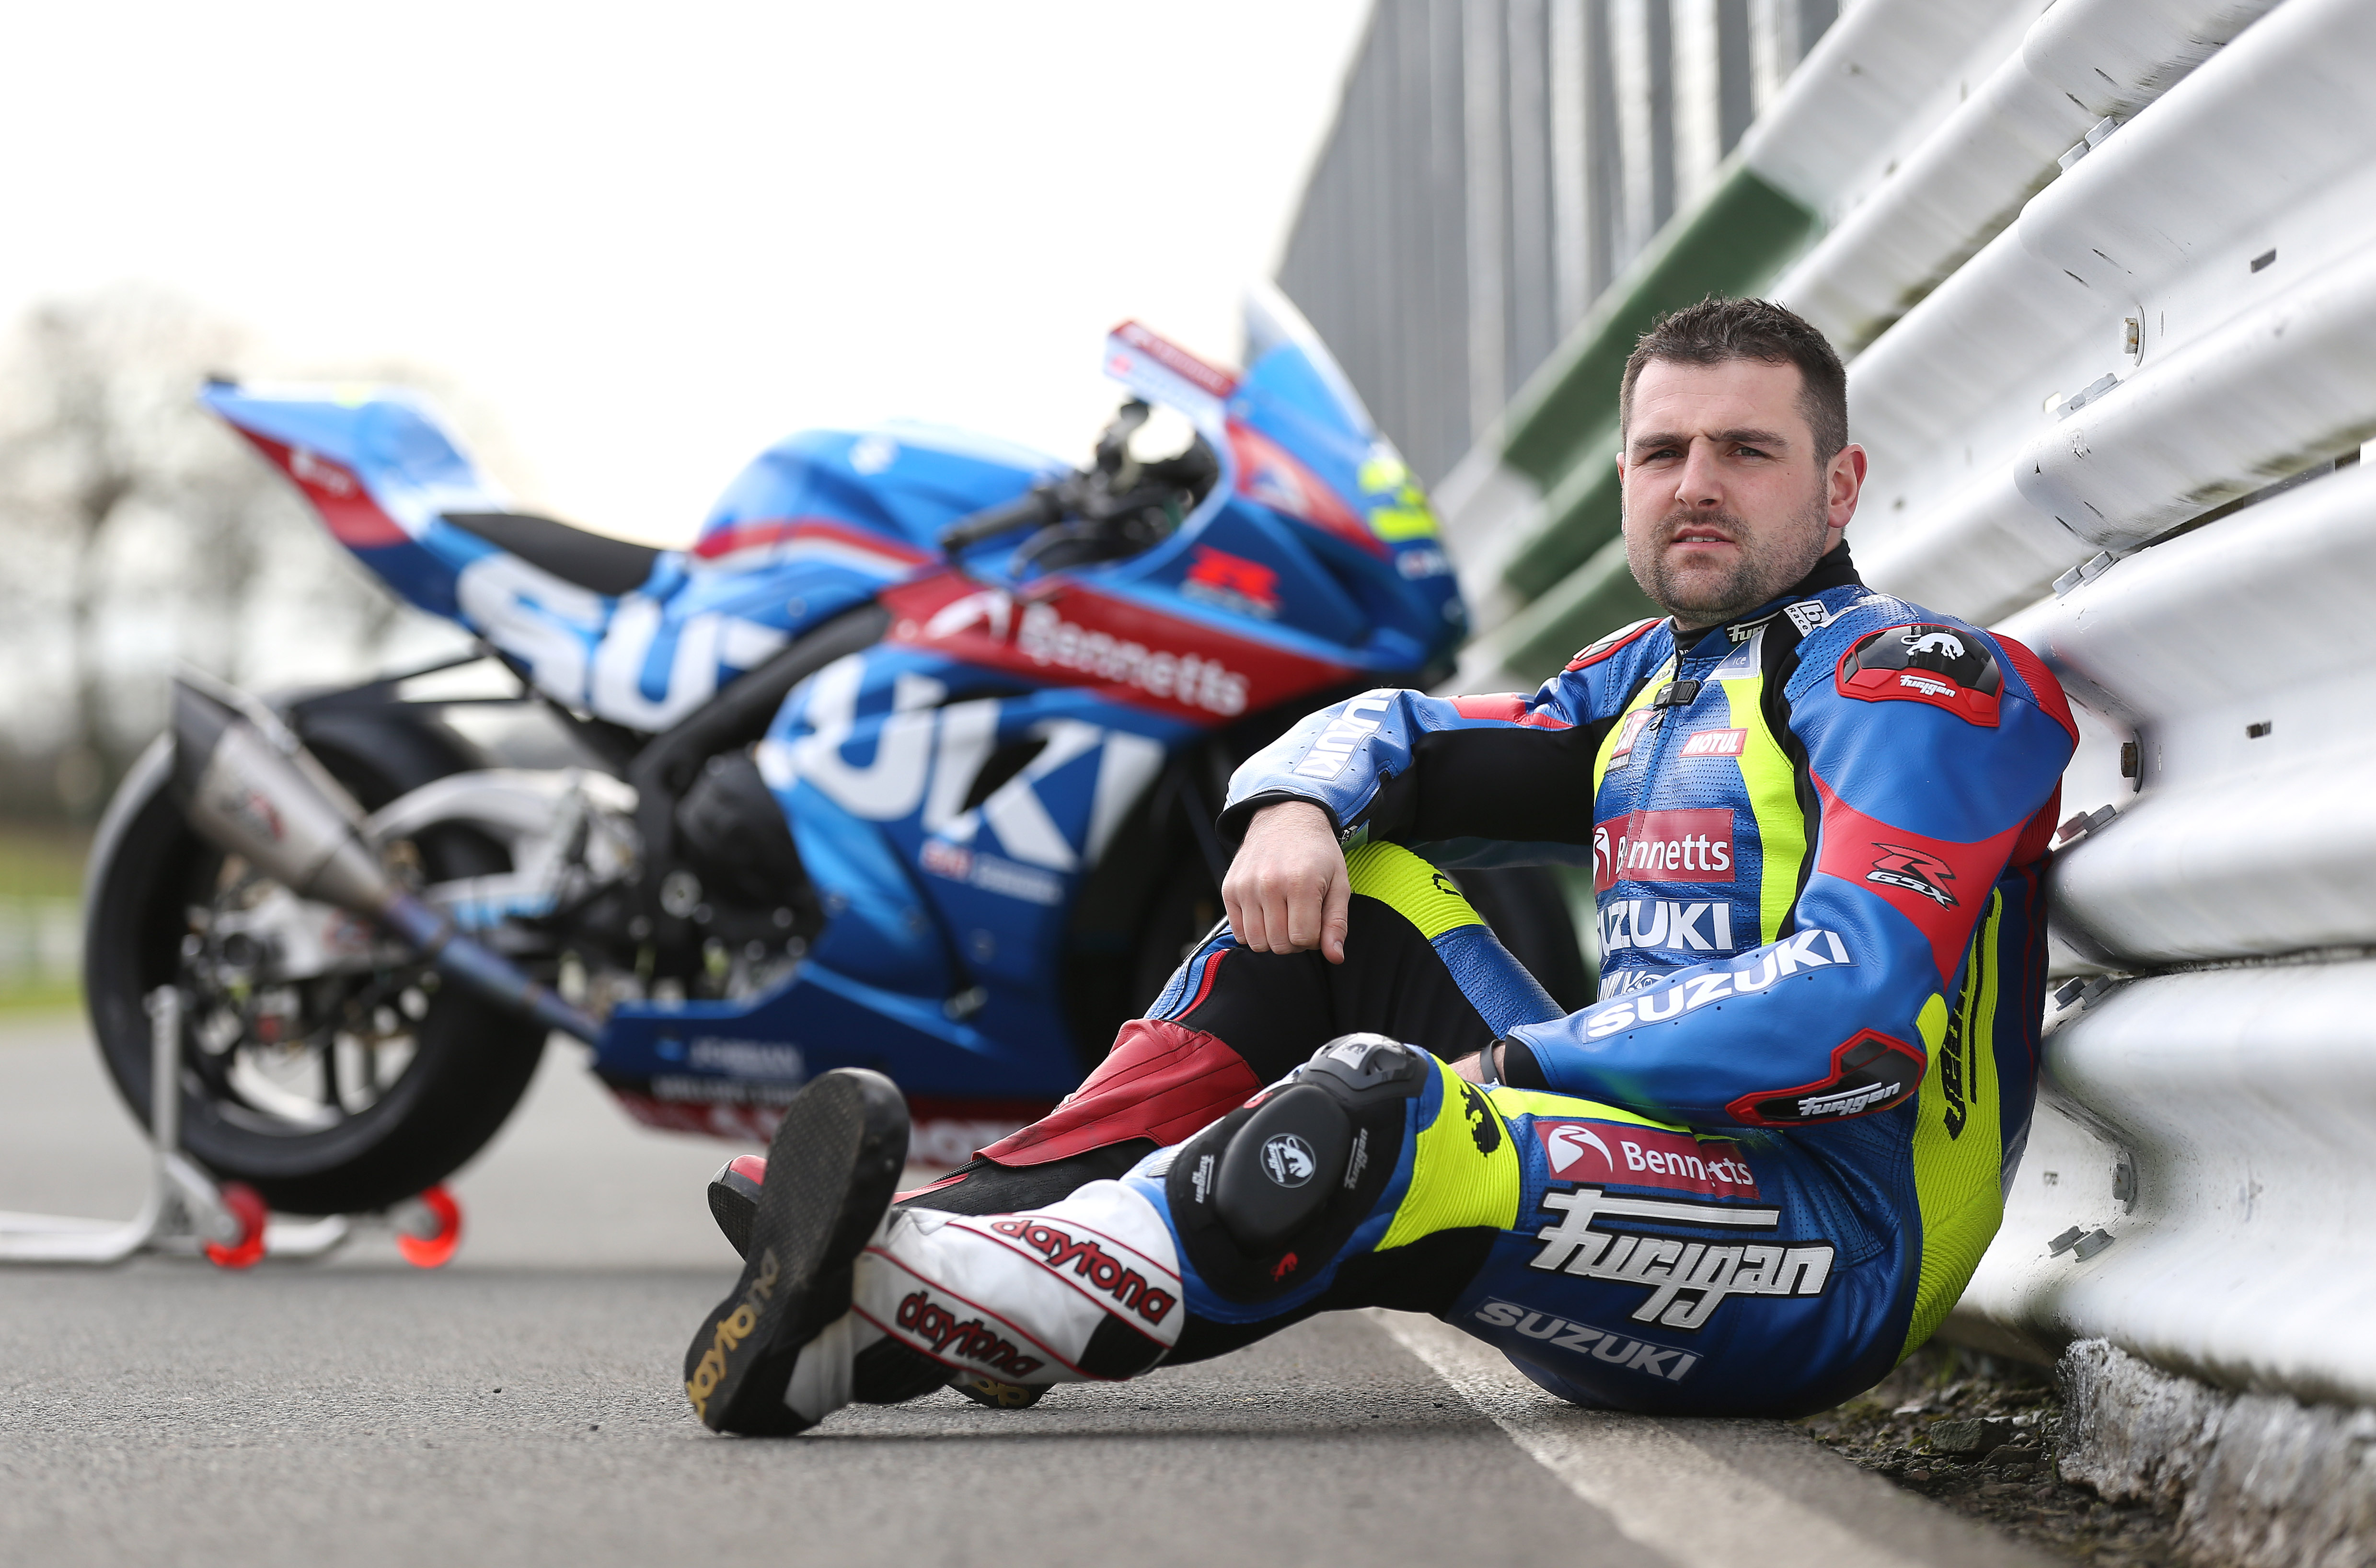 Dunlop’s powerful new Suzuki will be ‘perfect fit’ for Dundrod